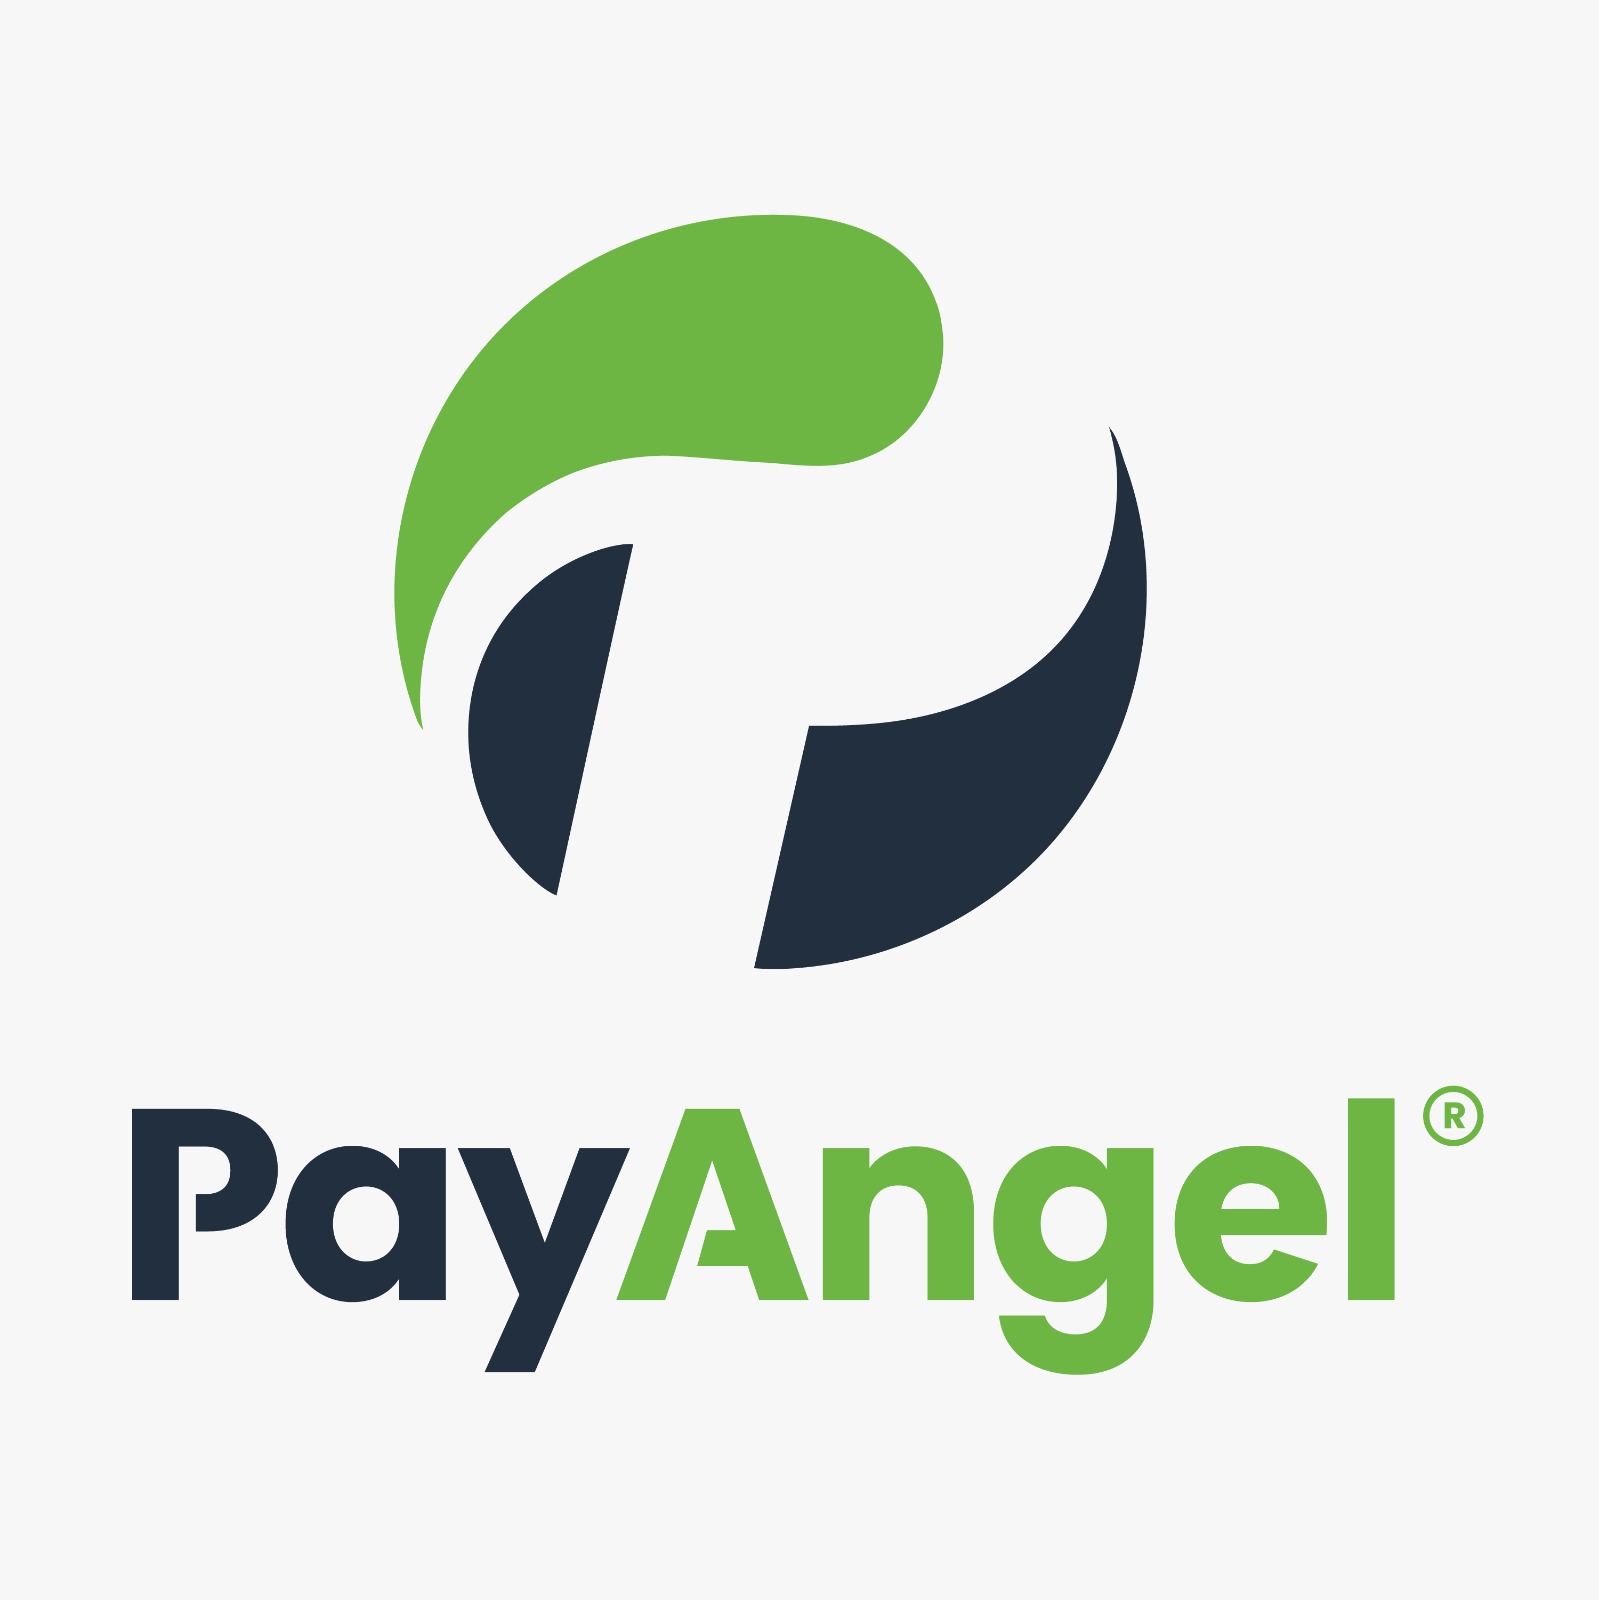 PayAngel - These are the amazing countries we serve. Comment your